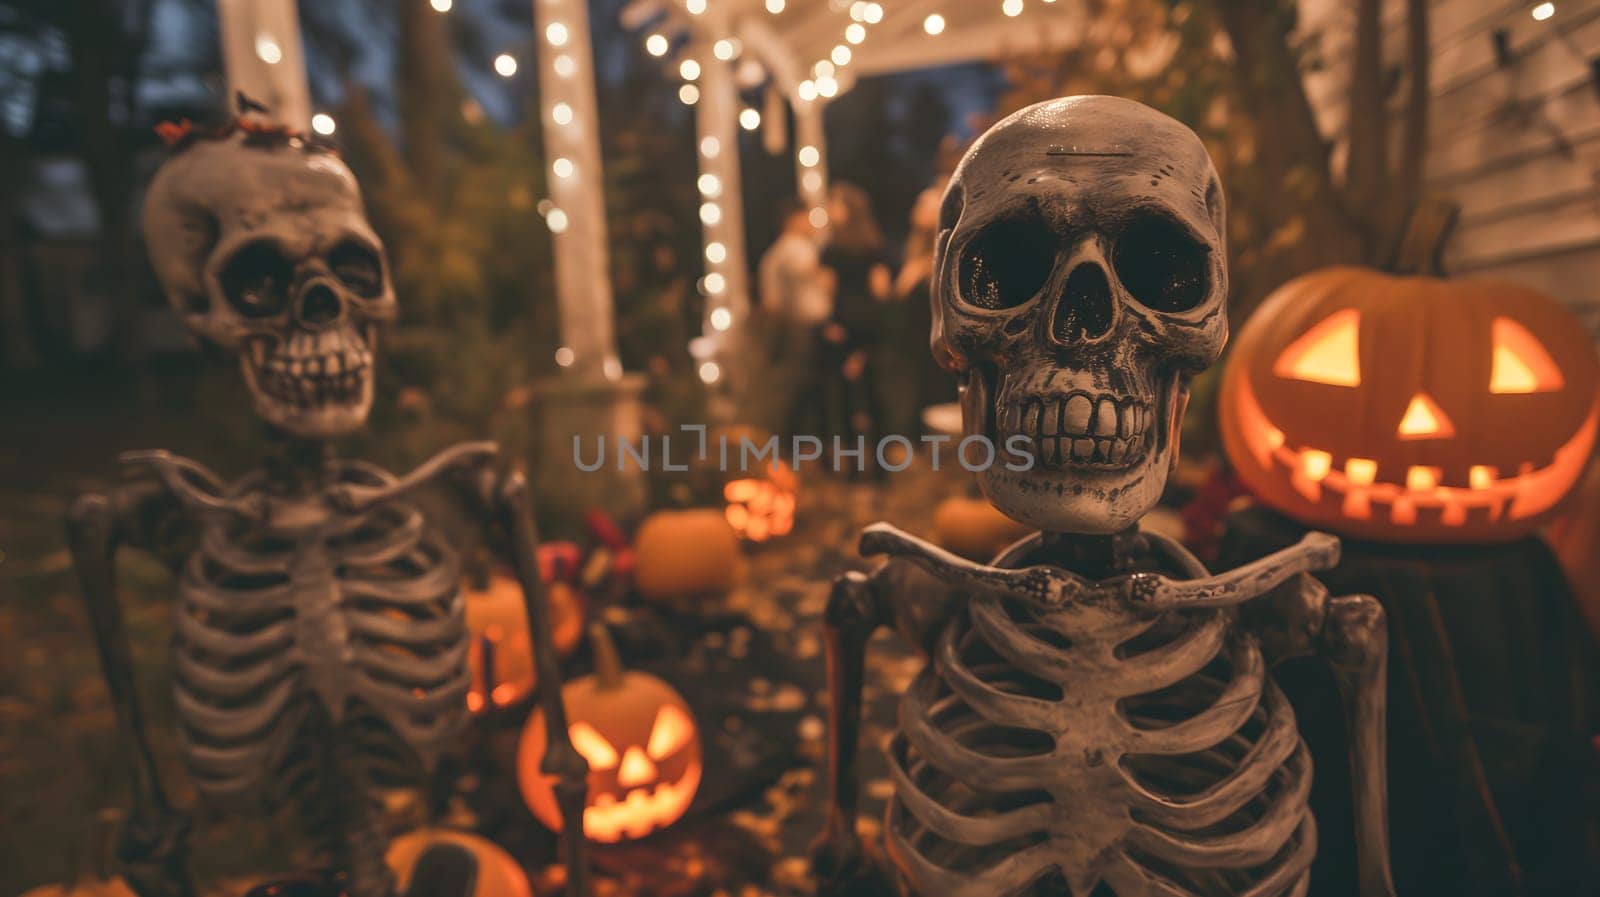 Skeletons in front of a house at Halloween. Neural network generated image. Not based on any actual scene or pattern.